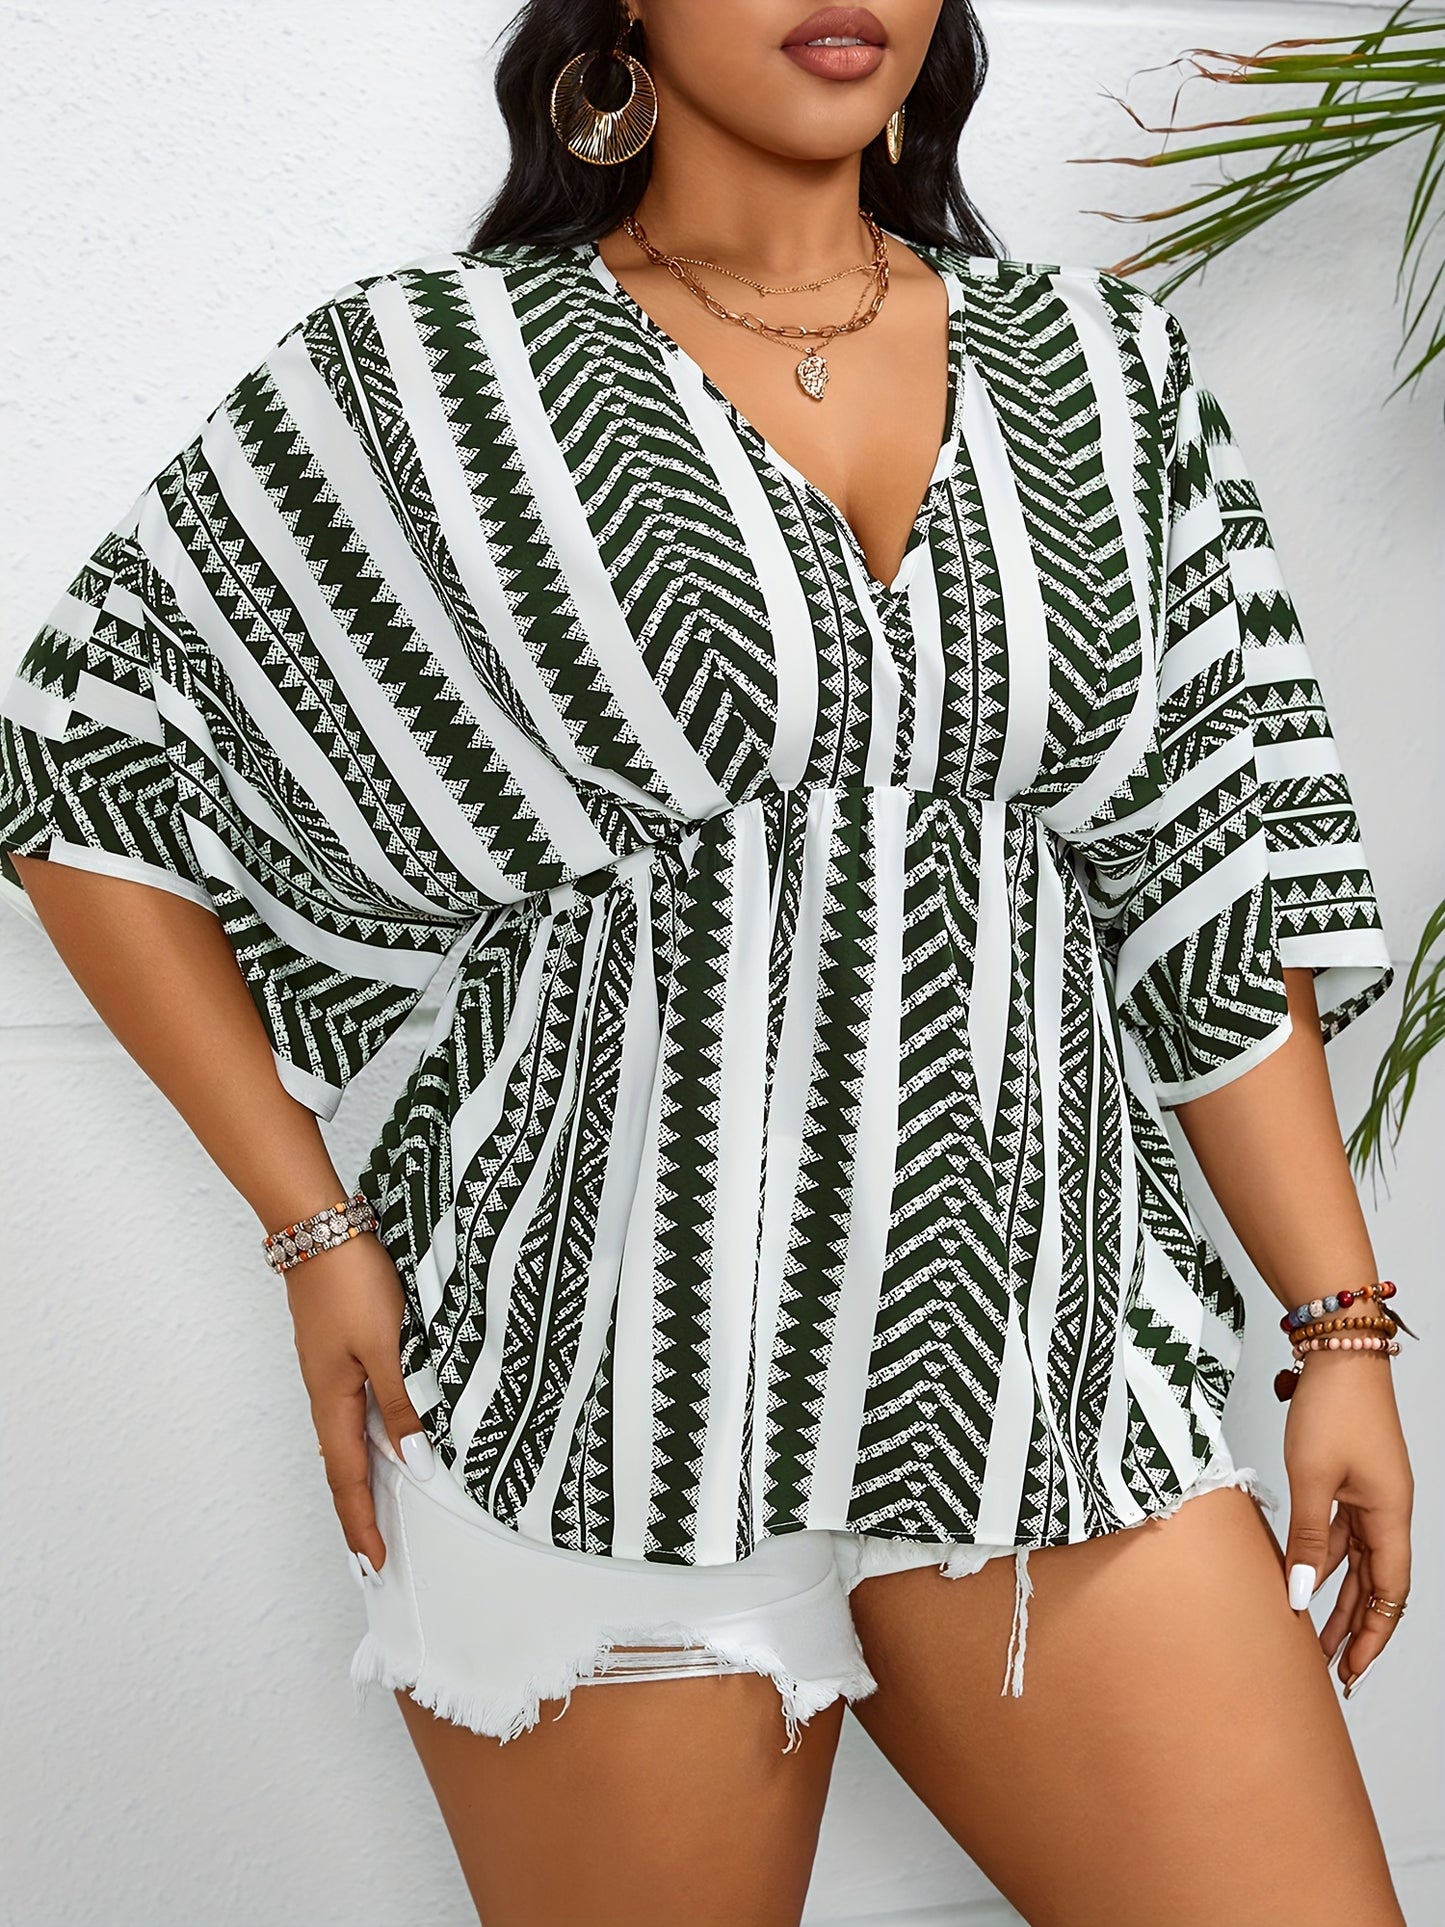 Plus Size Elegant V Neck Shirting Blouse - Chic Geo Print, Cinched Waist, Machine Washable, Non-Stretch Polyester Fabric, Perfect for Spring and Summer - Womens Fashion Clothing